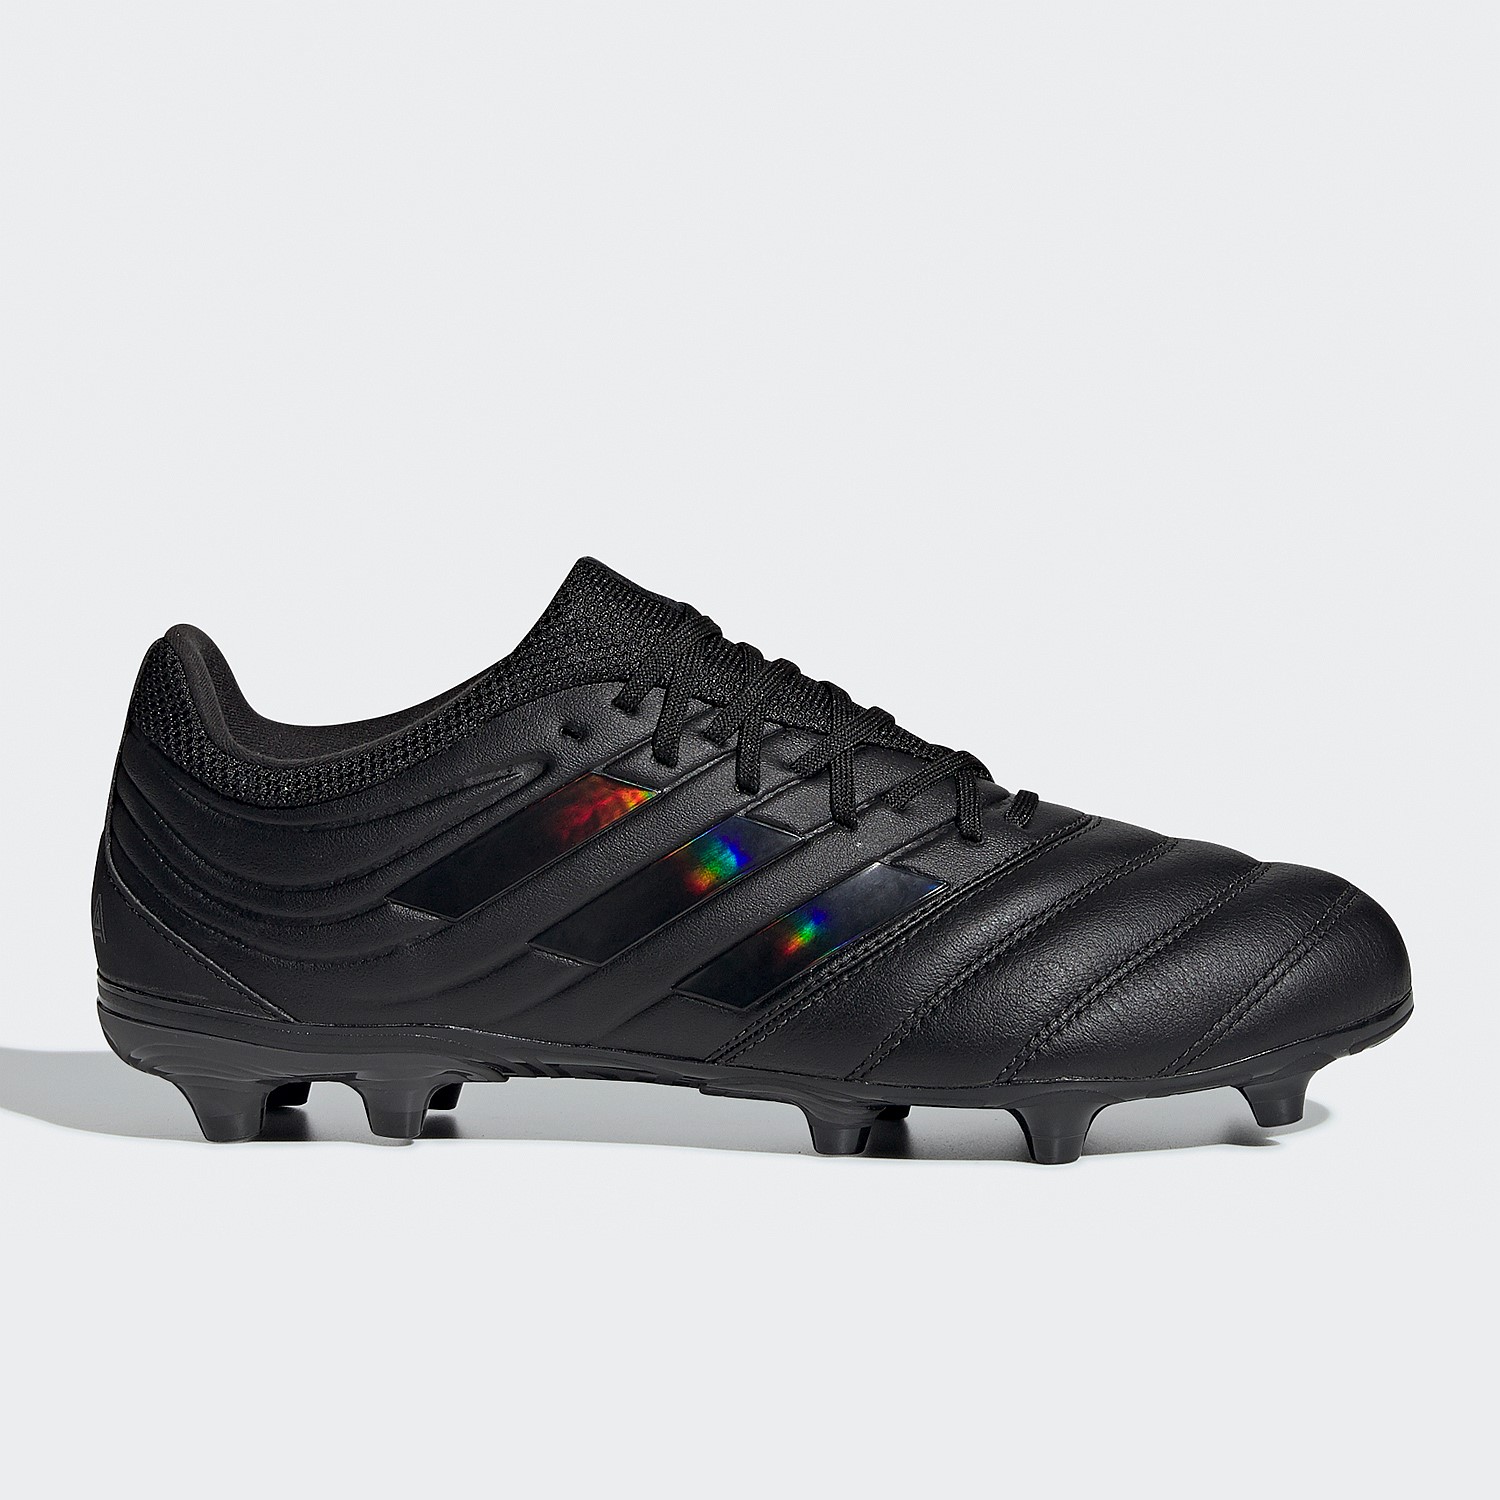 adidas boots online